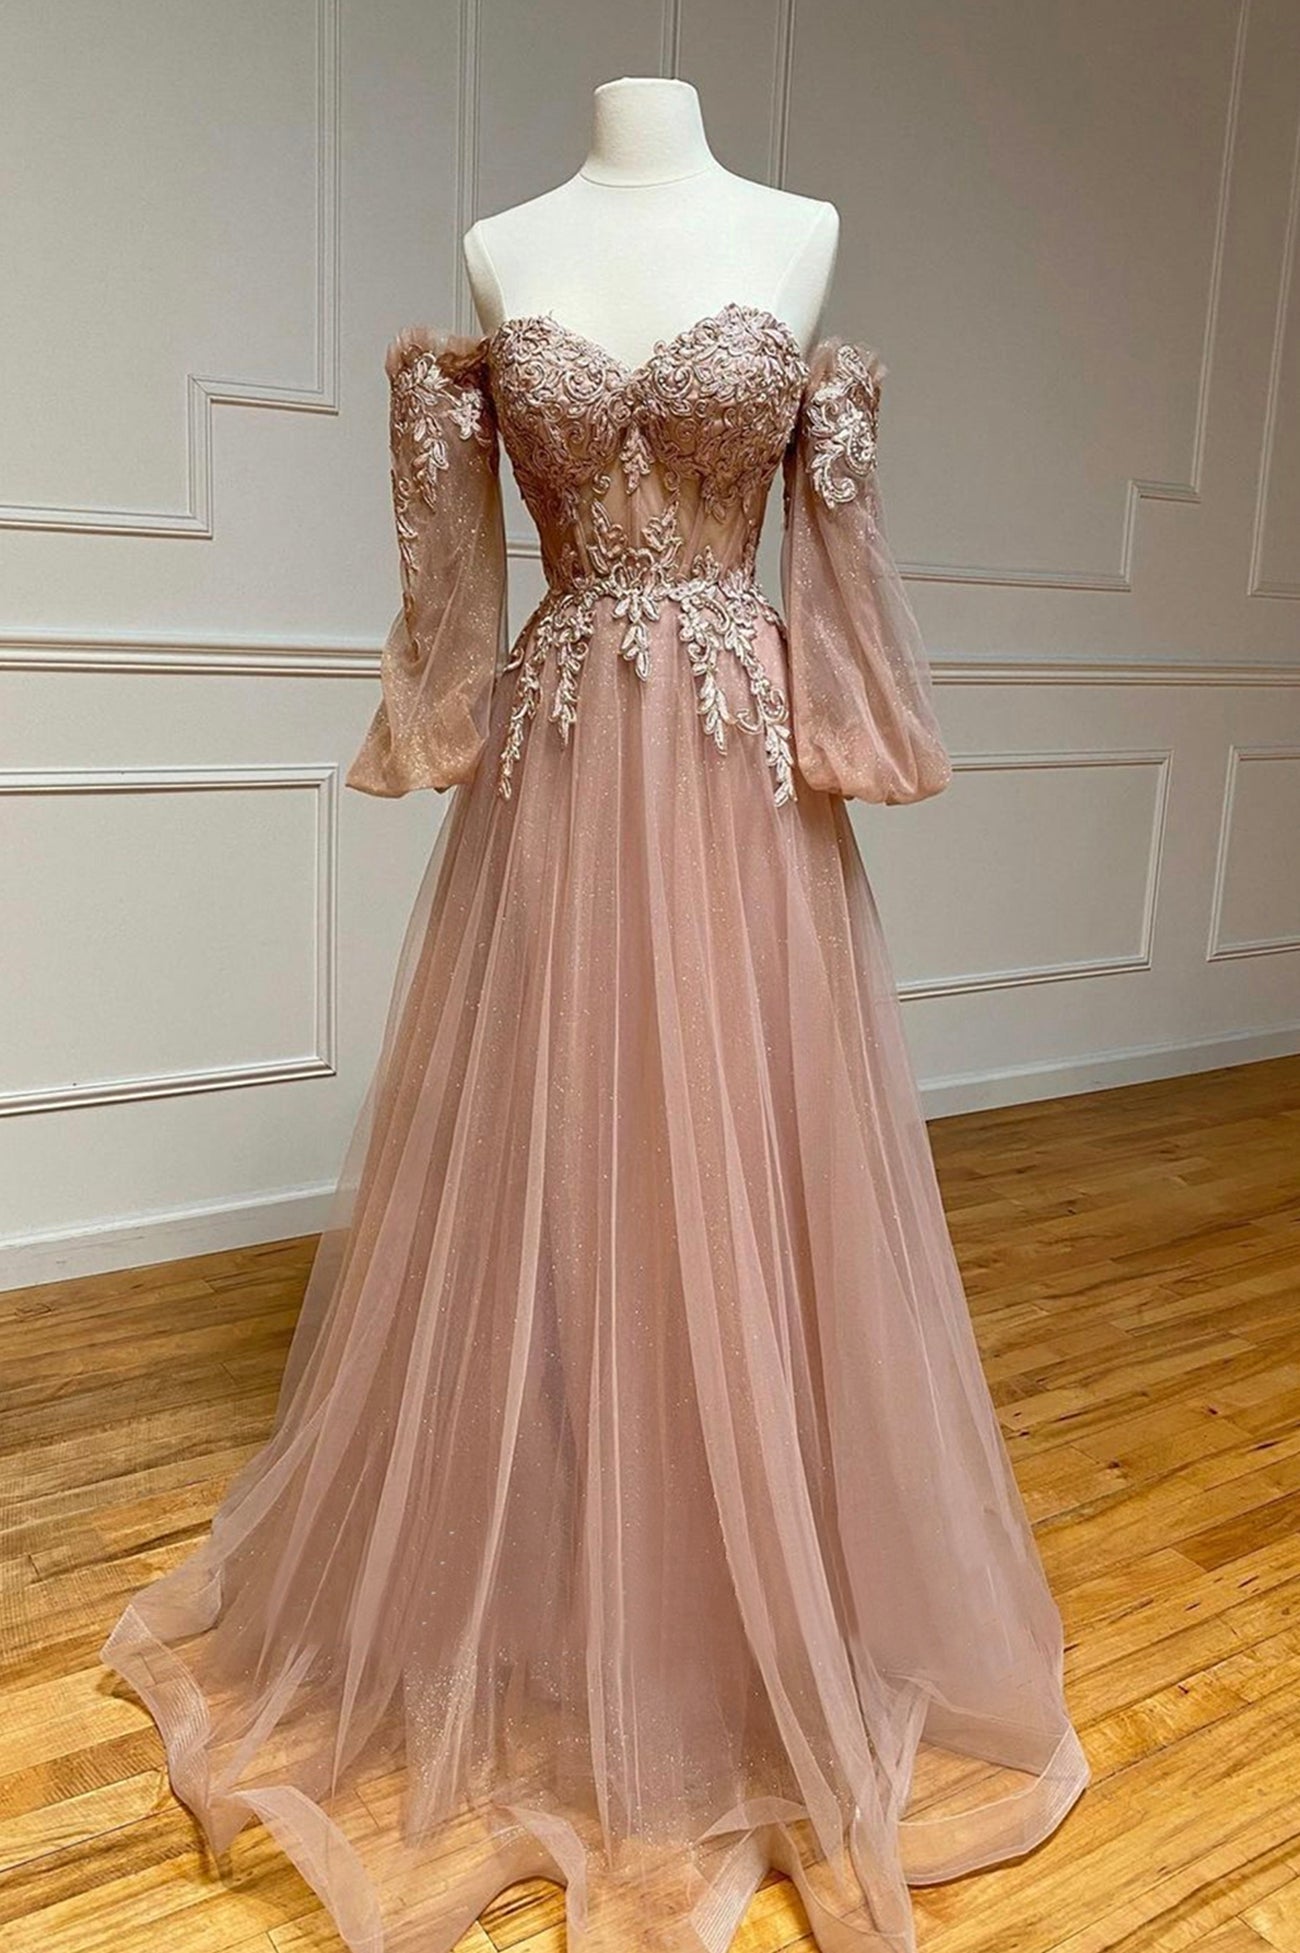 A-Line Strapless Long Lace Corset Prom Dress, Sweetheart Neck Tulle Evening Party Dress Outfits, Bridesmaid Dresses Sale